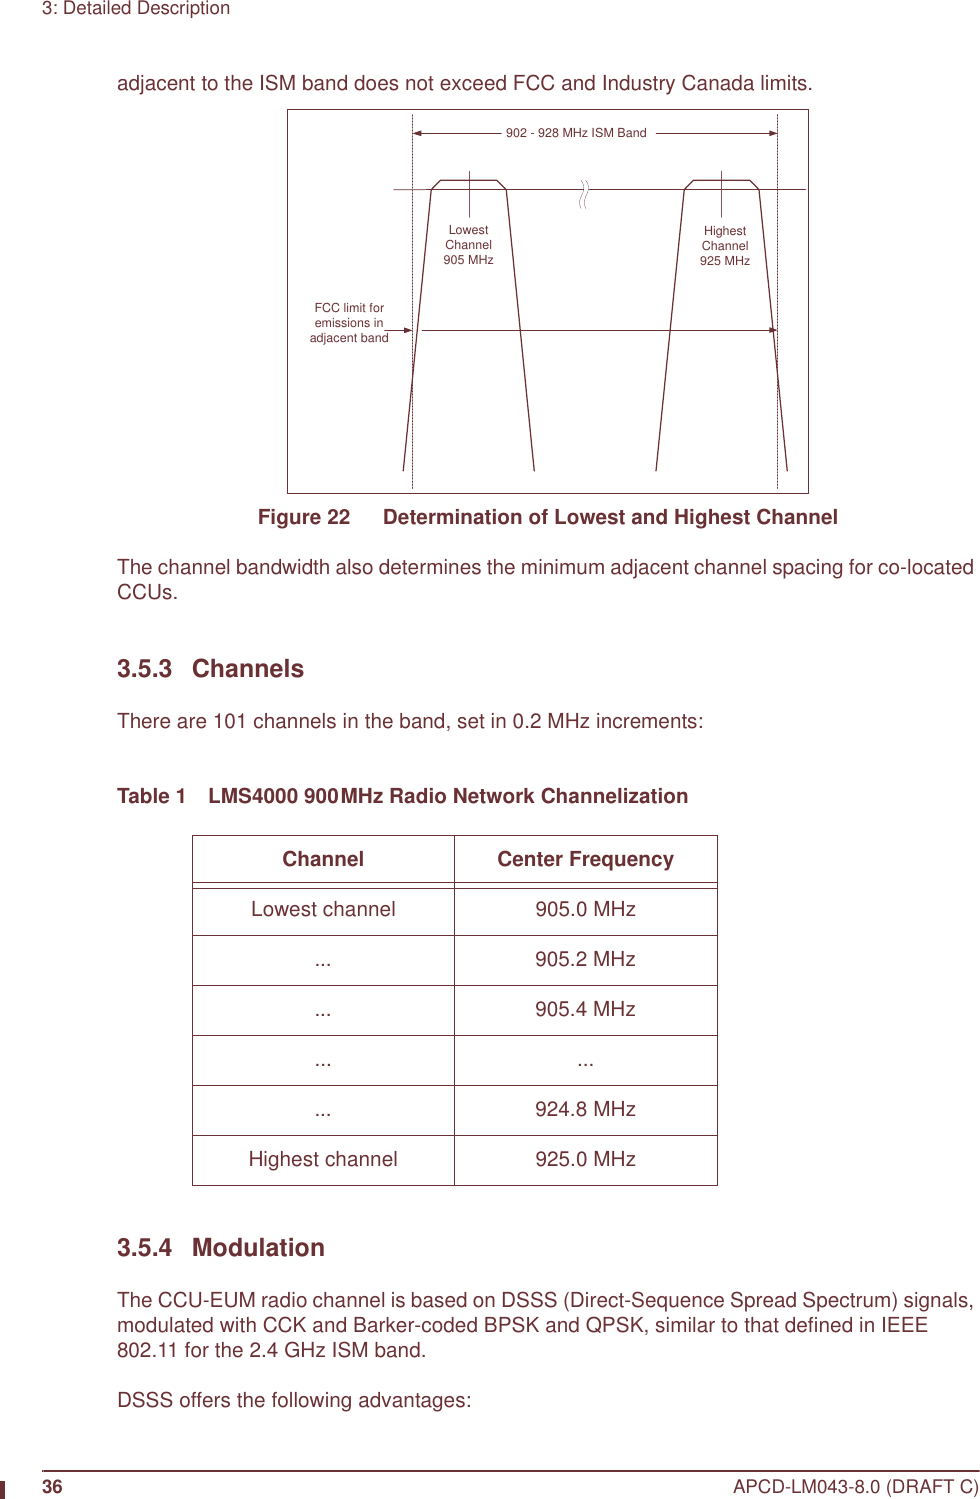 36 APCD-LM043-8.0 (DRAFT C)3: Detailed Descriptionadjacent to the ISM band does not exceed FCC and Industry Canada limits.Figure 22   Determination of Lowest and Highest ChannelThe channel bandwidth also determines the minimum adjacent channel spacing for co-located CCUs.3.5.3 ChannelsThere are 101 channels in the band, set in 0.2 MHz increments:Table 1 LMS4000 900MHz Radio Network Channelization3.5.4 ModulationThe CCU-EUM radio channel is based on DSSS (Direct-Sequence Spread Spectrum) signals, modulated with CCK and Barker-coded BPSK and QPSK, similar to that defined in IEEE 802.11 for the 2.4 GHz ISM band.DSSS offers the following advantages:Channel Center FrequencyLowest channel 905.0 MHz... 905.2 MHz... 905.4 MHz... ...... 924.8 MHzHighest channel 925.0 MHz902 - 928 MHz ISM BandFCC limit foremissions inadjacent bandLowestChannel905 MHzHighestChannel925 MHz